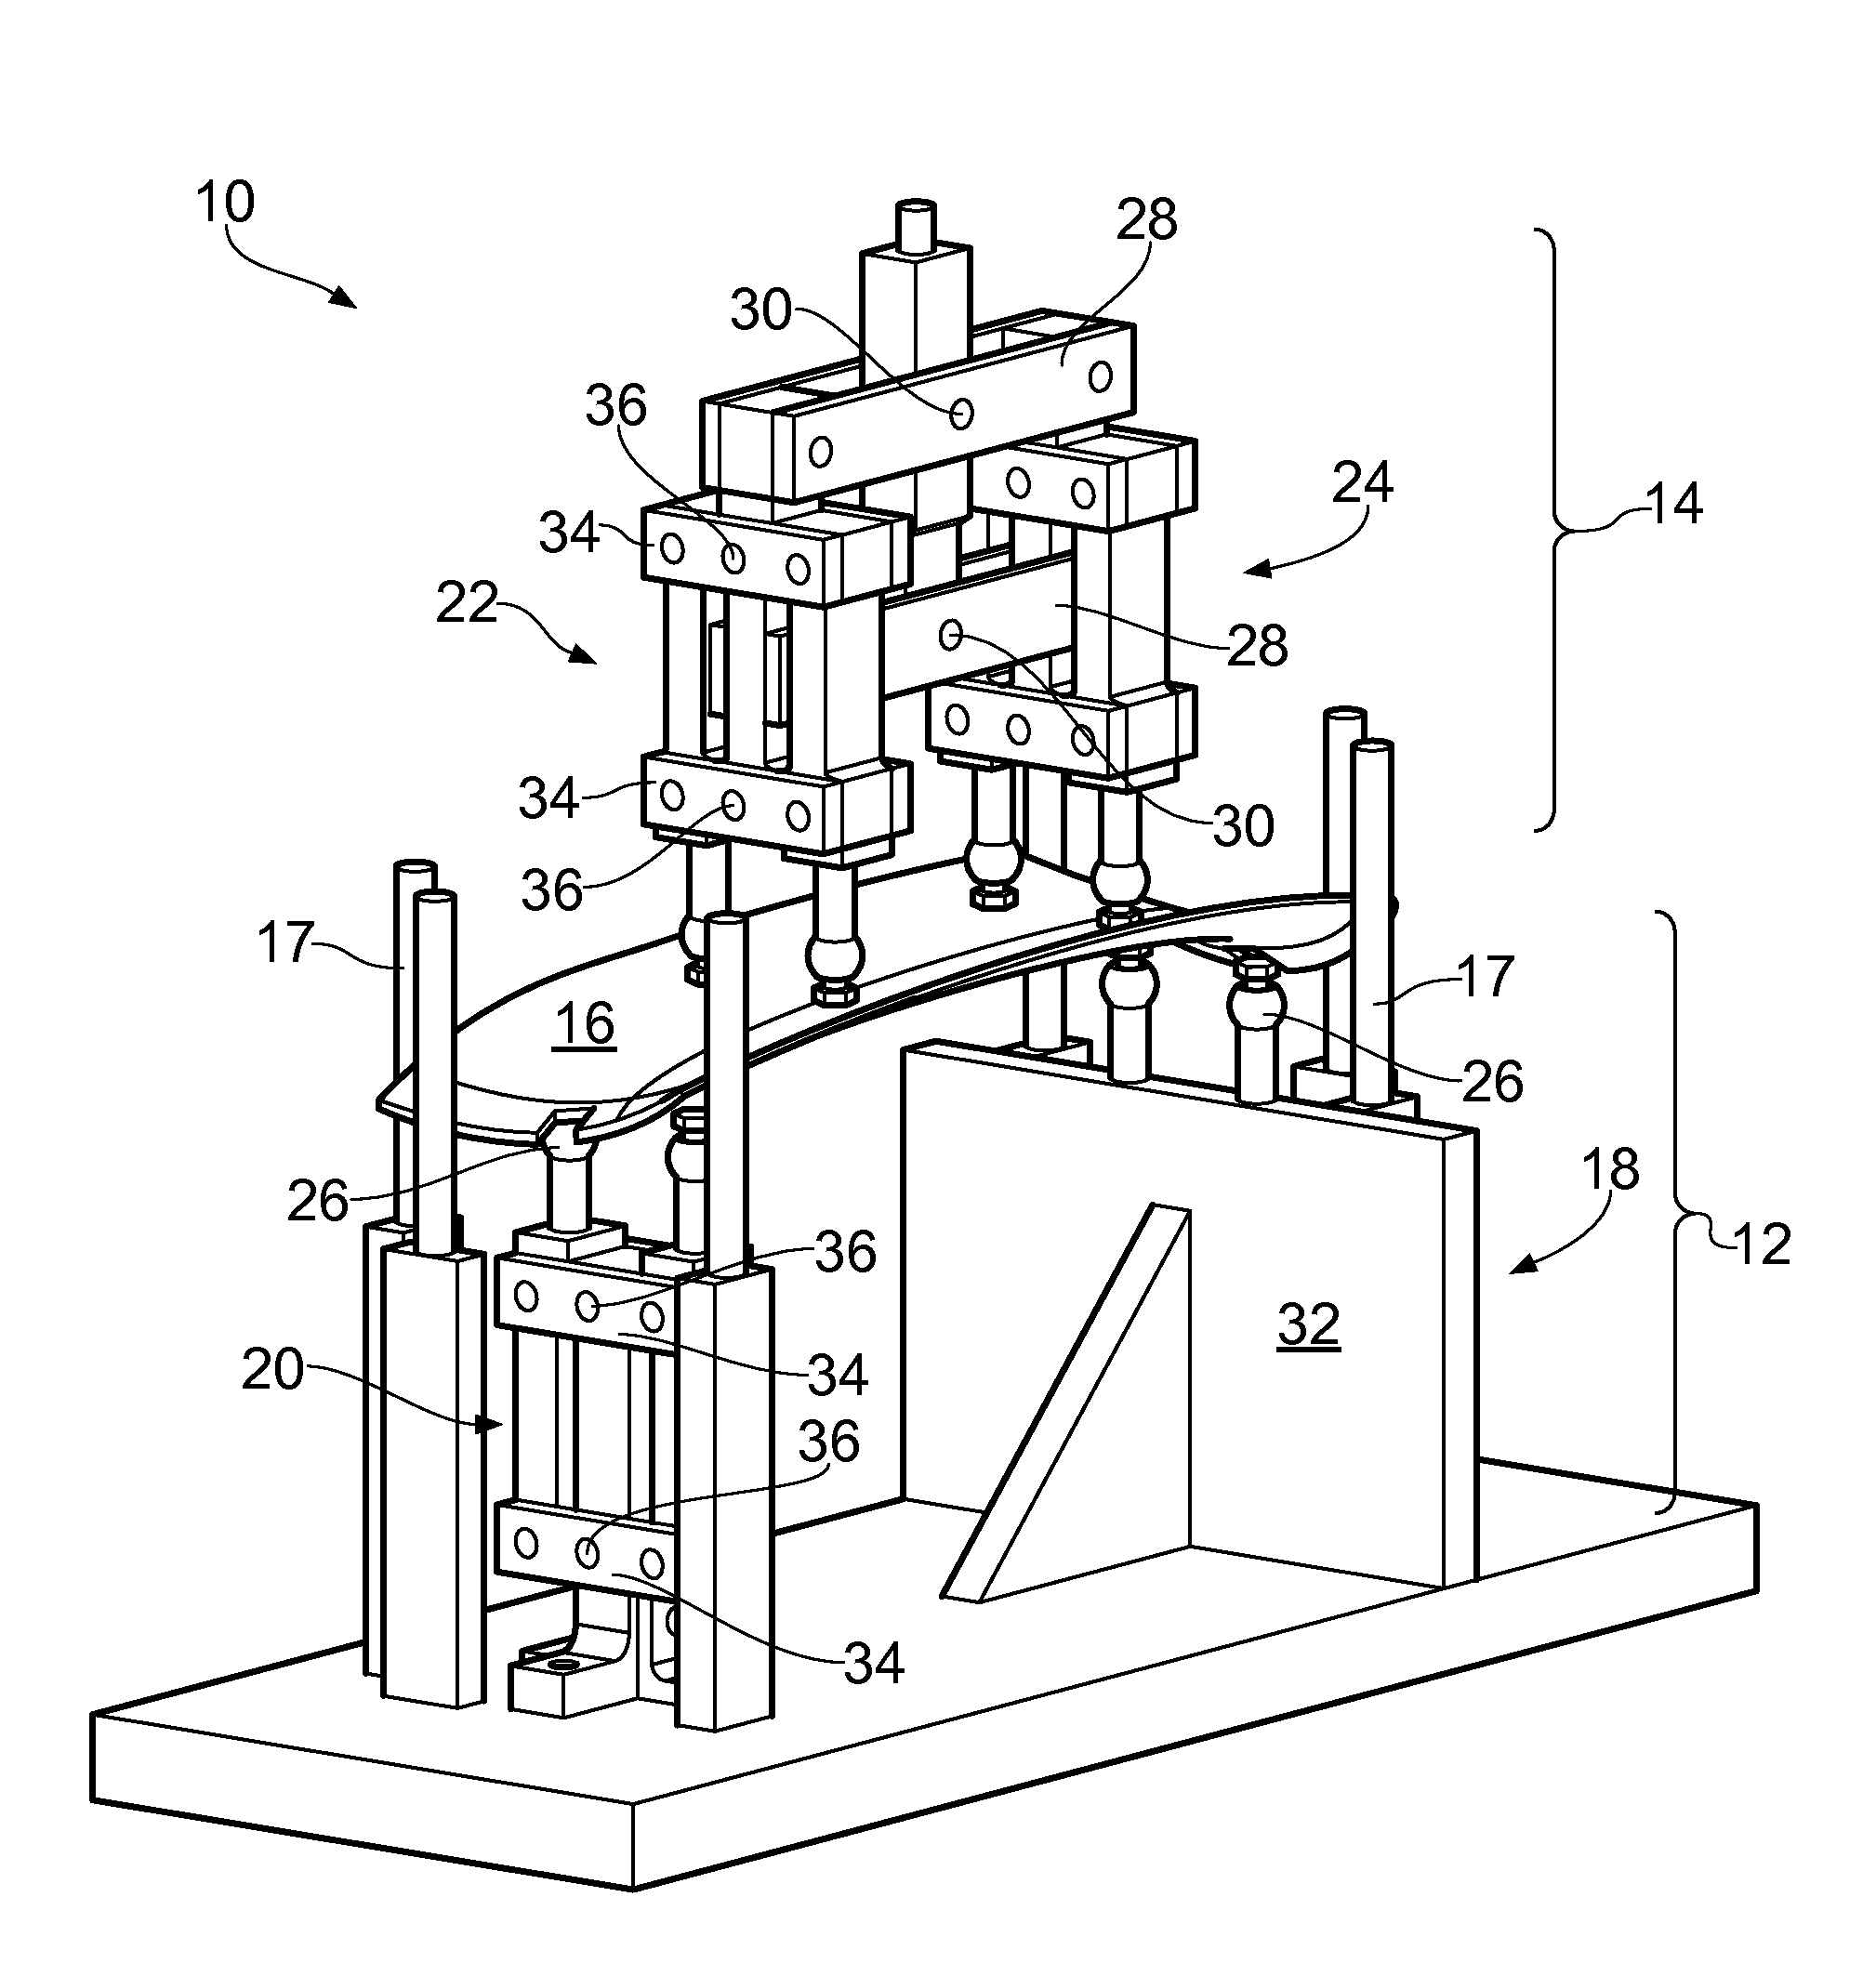 Apparatus for four-point bend testing